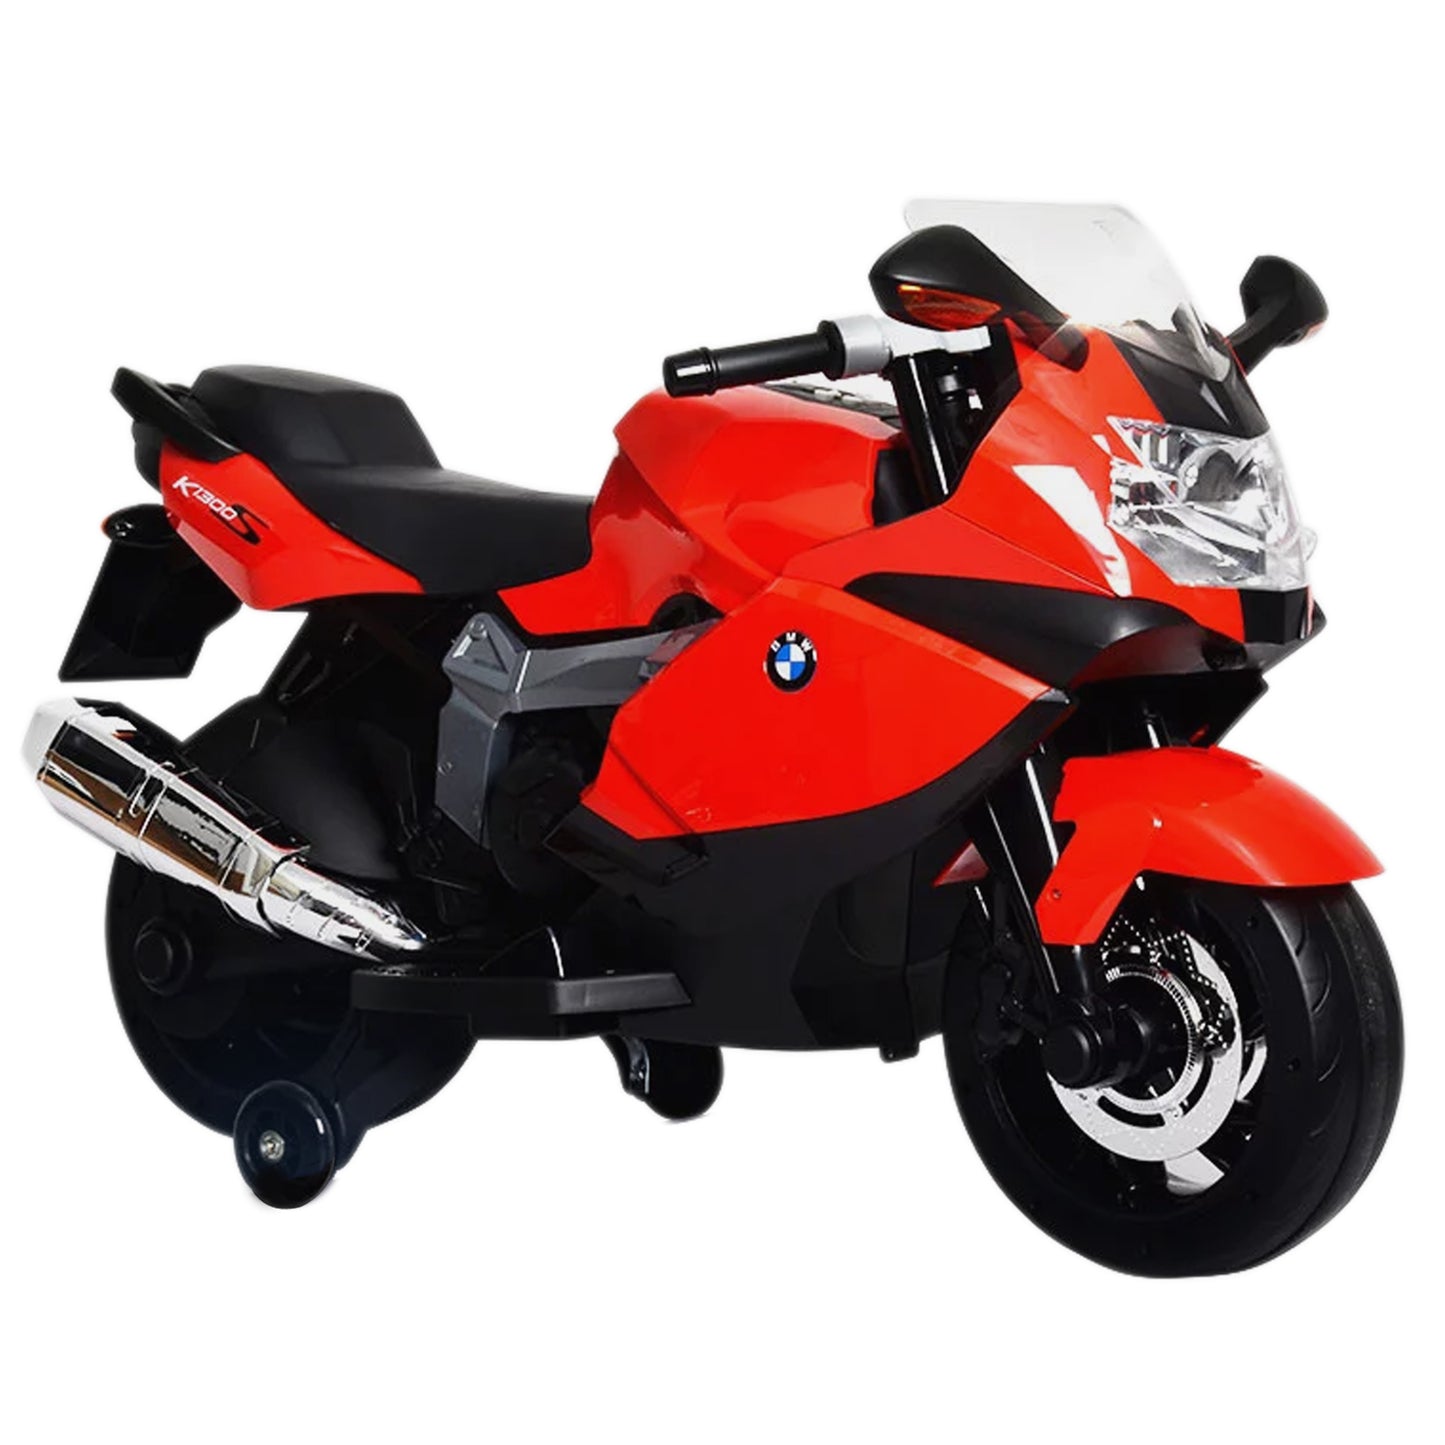 BMW K 1300(Without Packing)